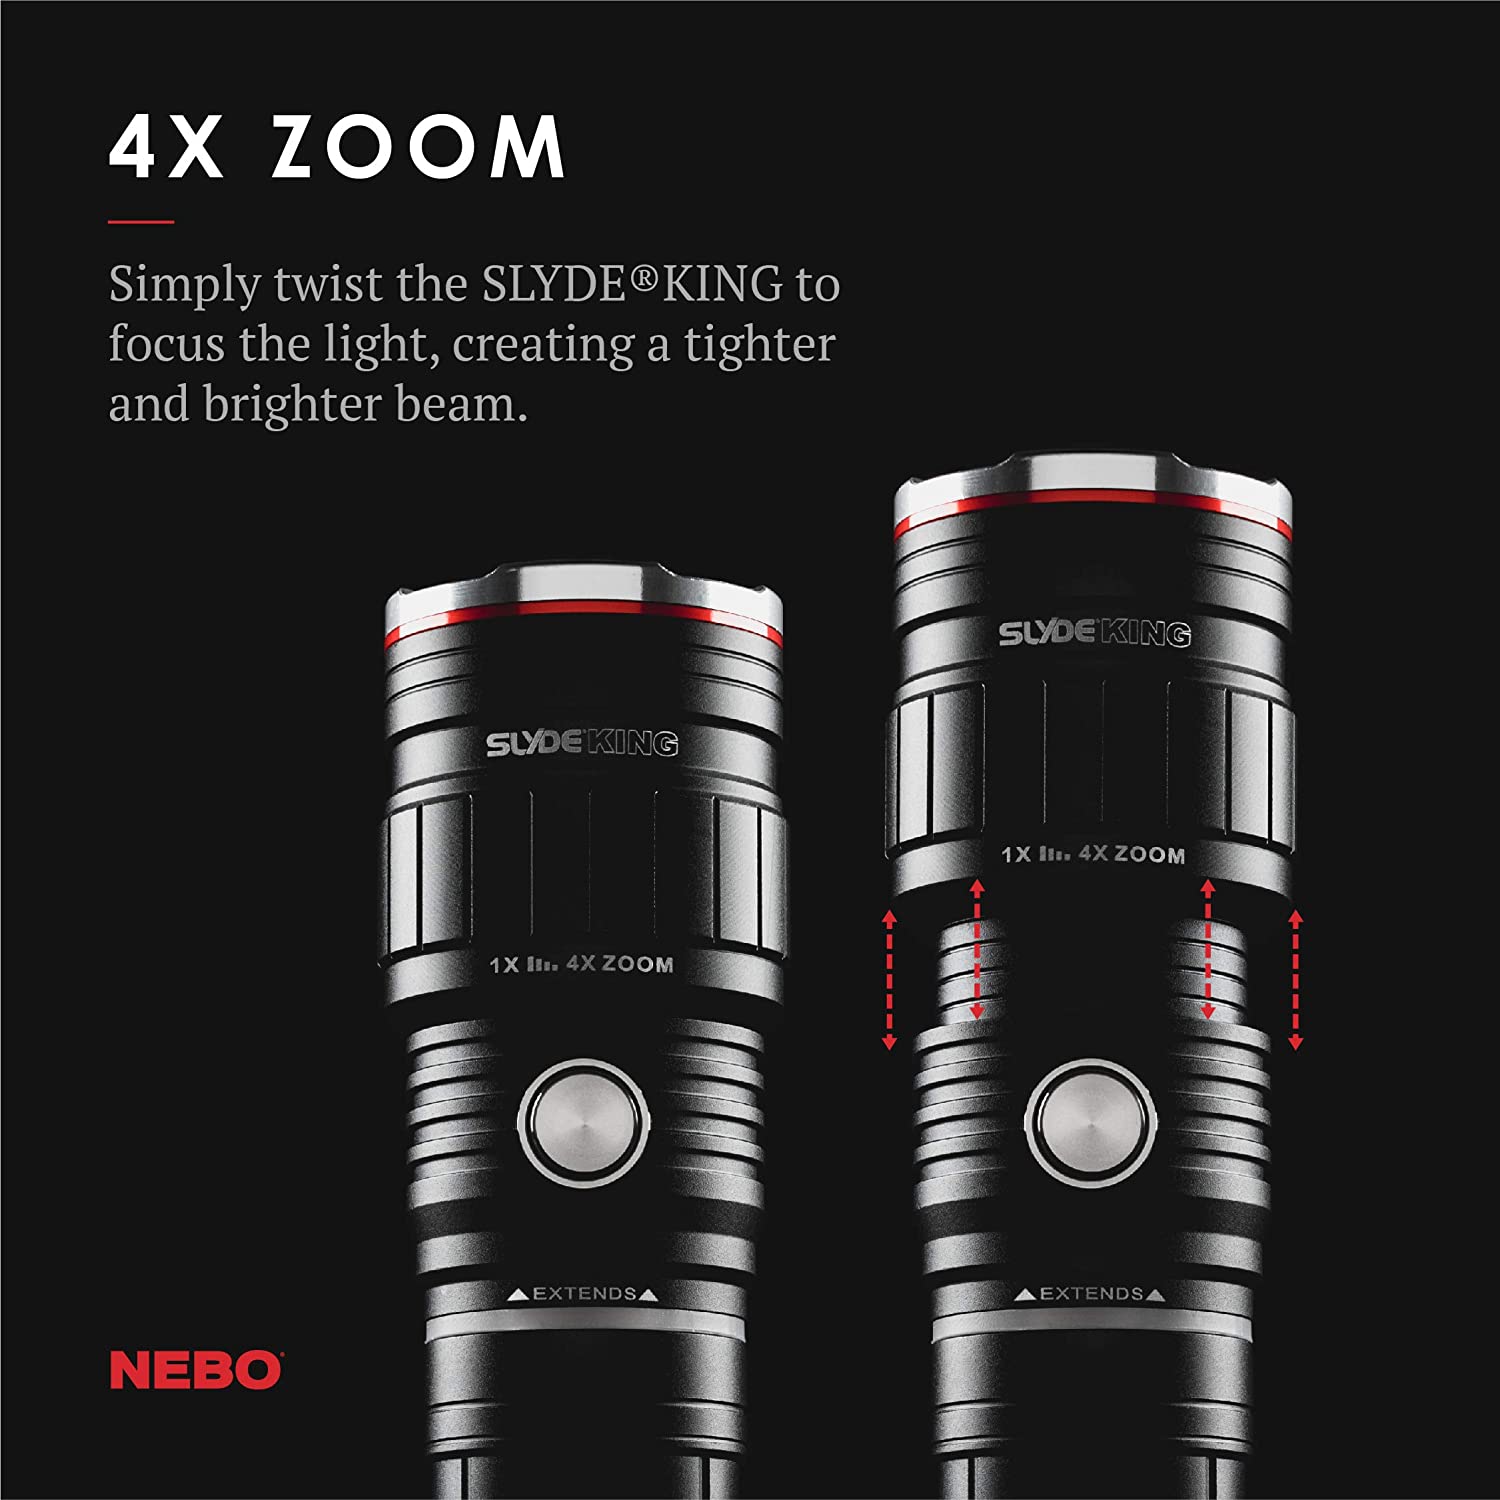 NEBO Slyde King Flashlight, Rechargeable LED Flashlight and Work Light, Bright, Durable, Everday Carry & Camping Flashlight with 4 Light Modes, C.O.B. Work Light and Magnetic Base - image 3 of 7